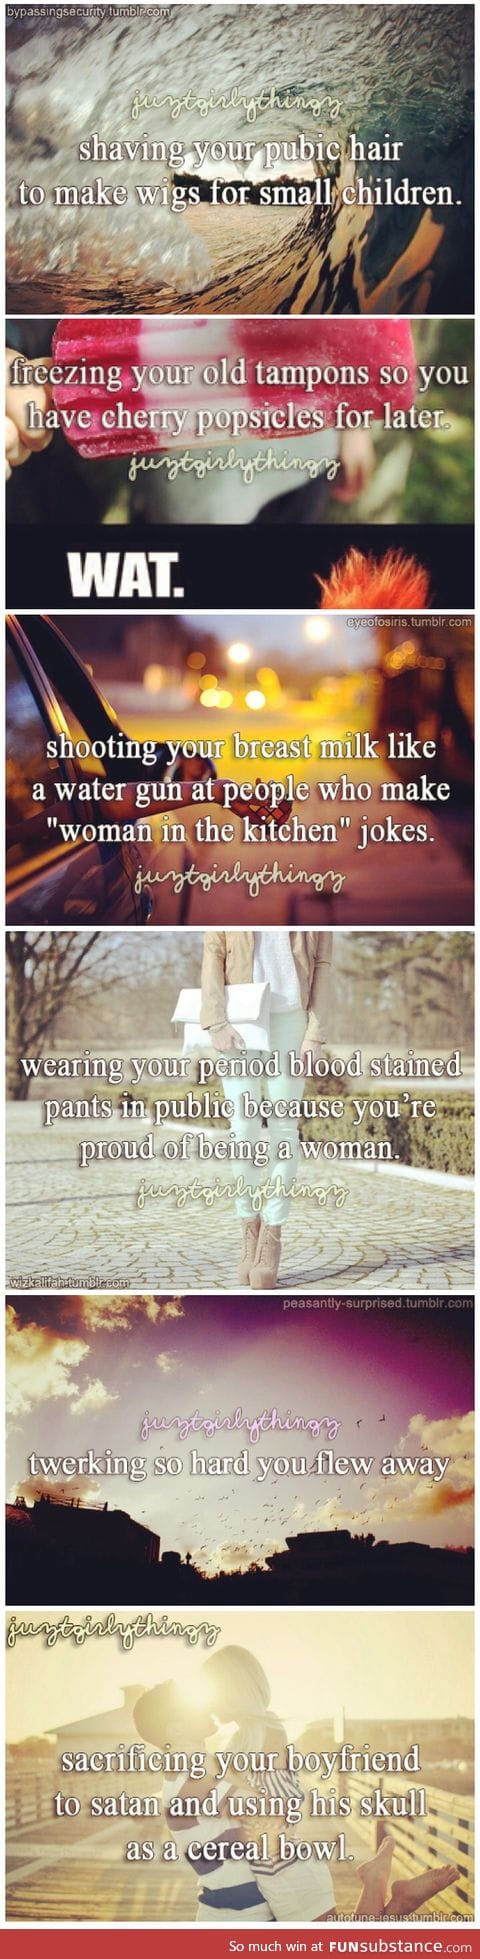 Da hell just girly things?